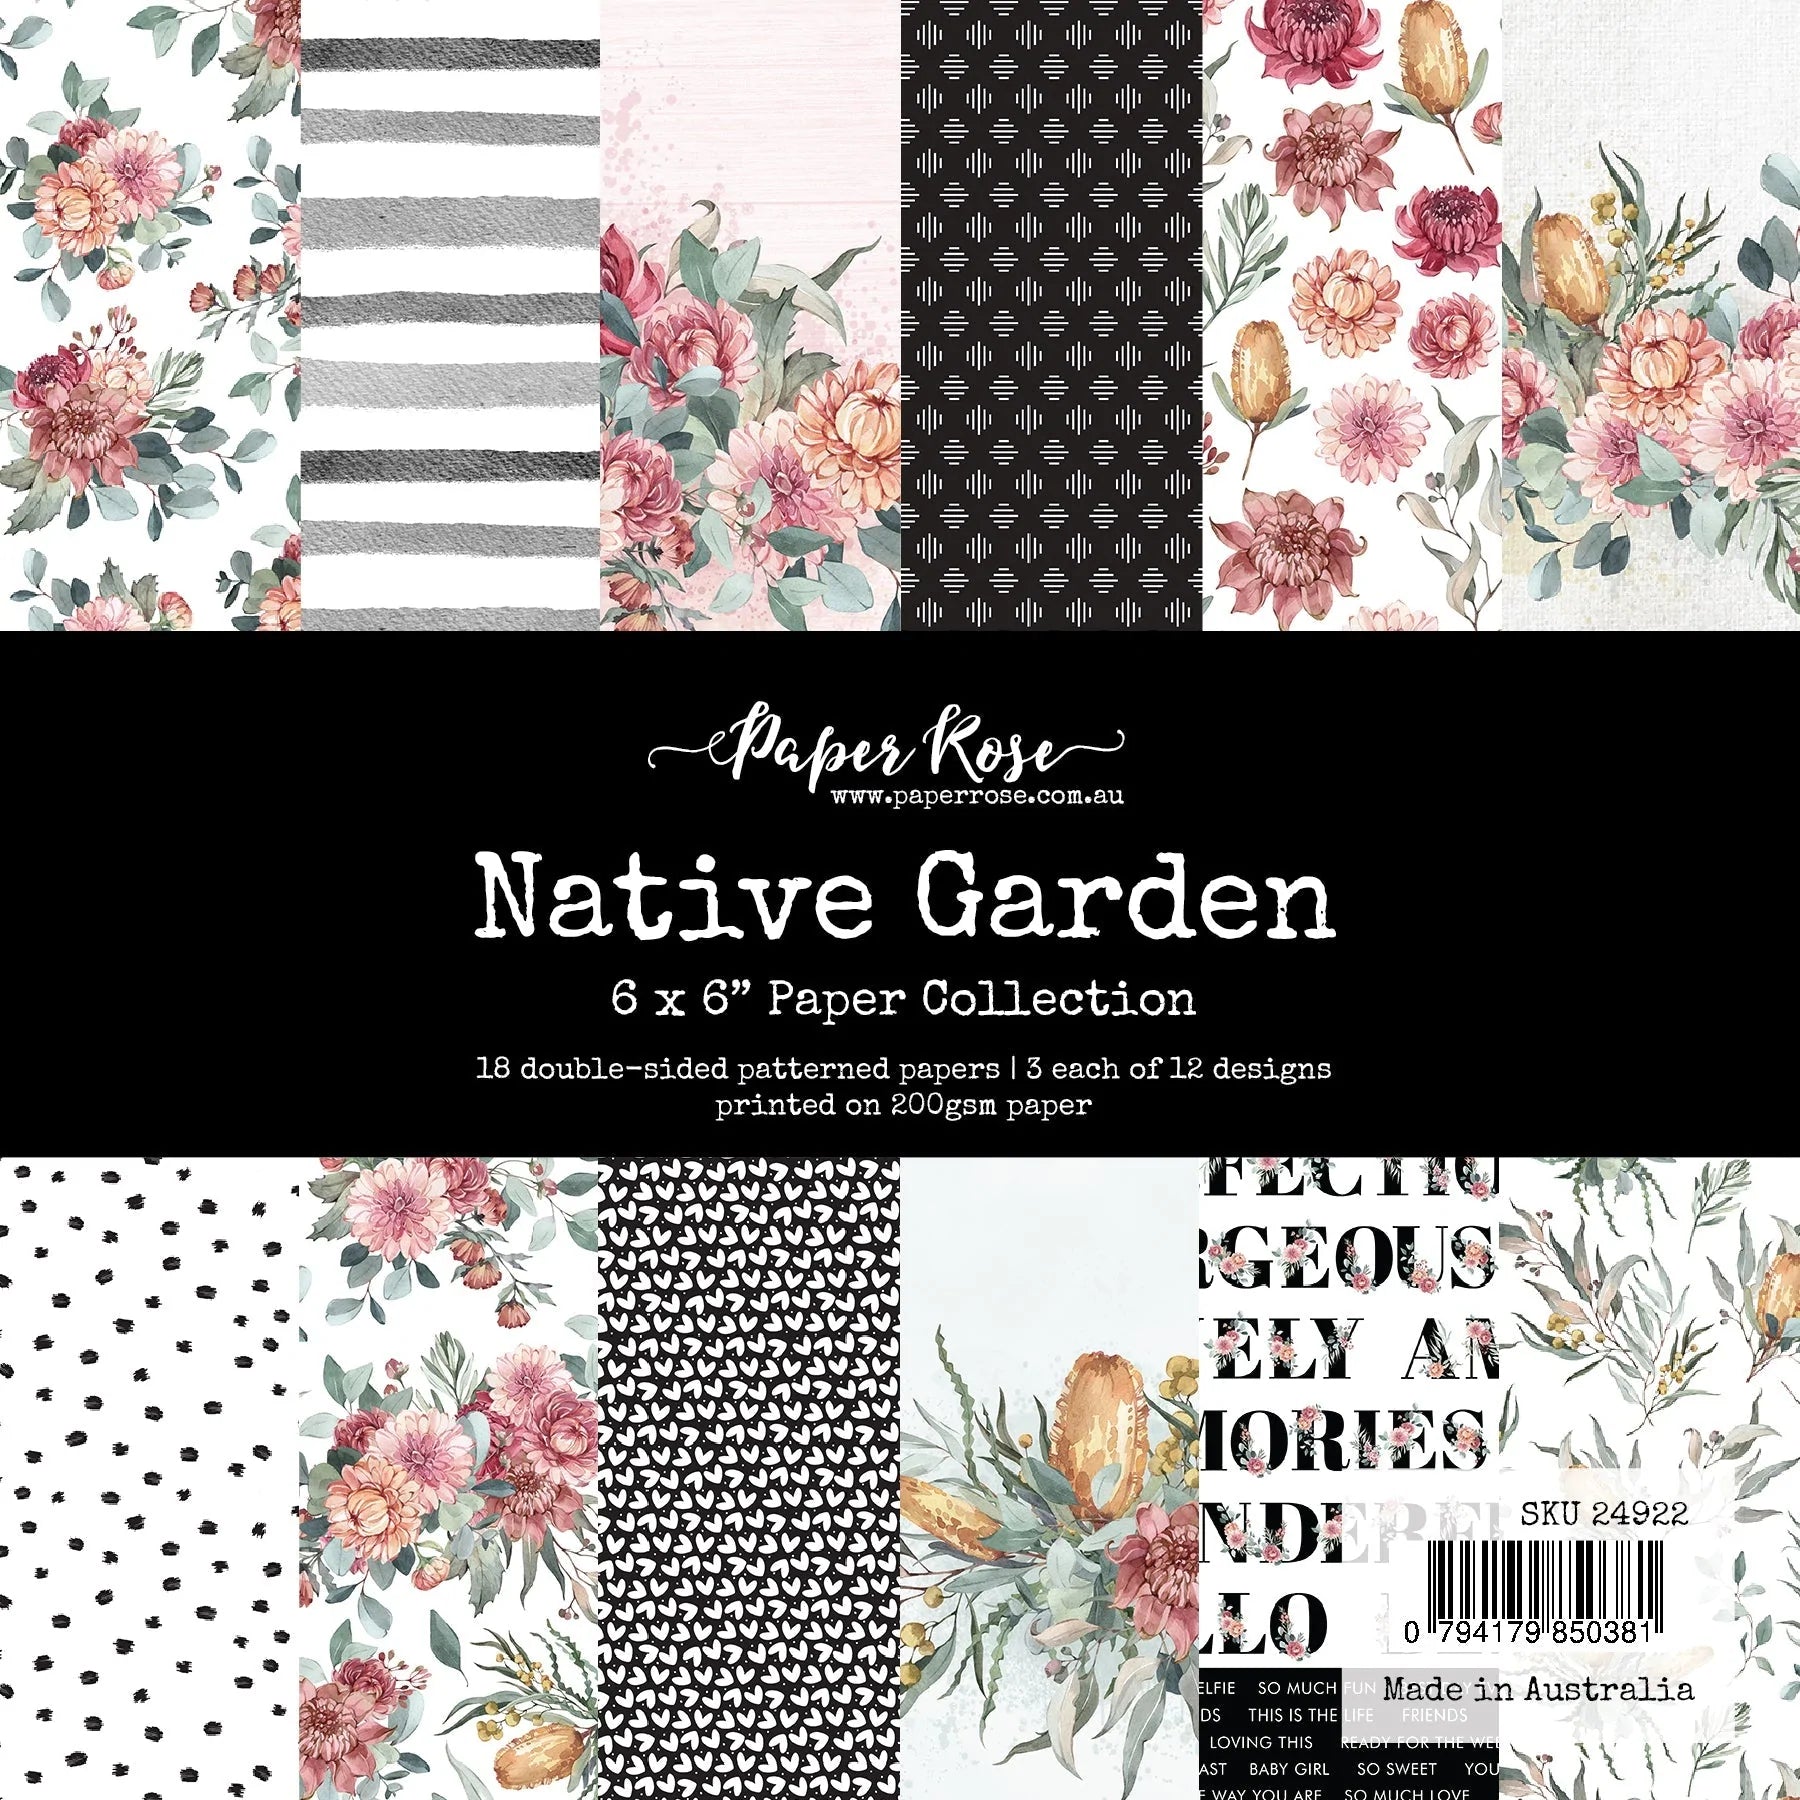 Paper Rose - Native Garden 6x6 Paper Collection Arts & Crafts Paper Rose